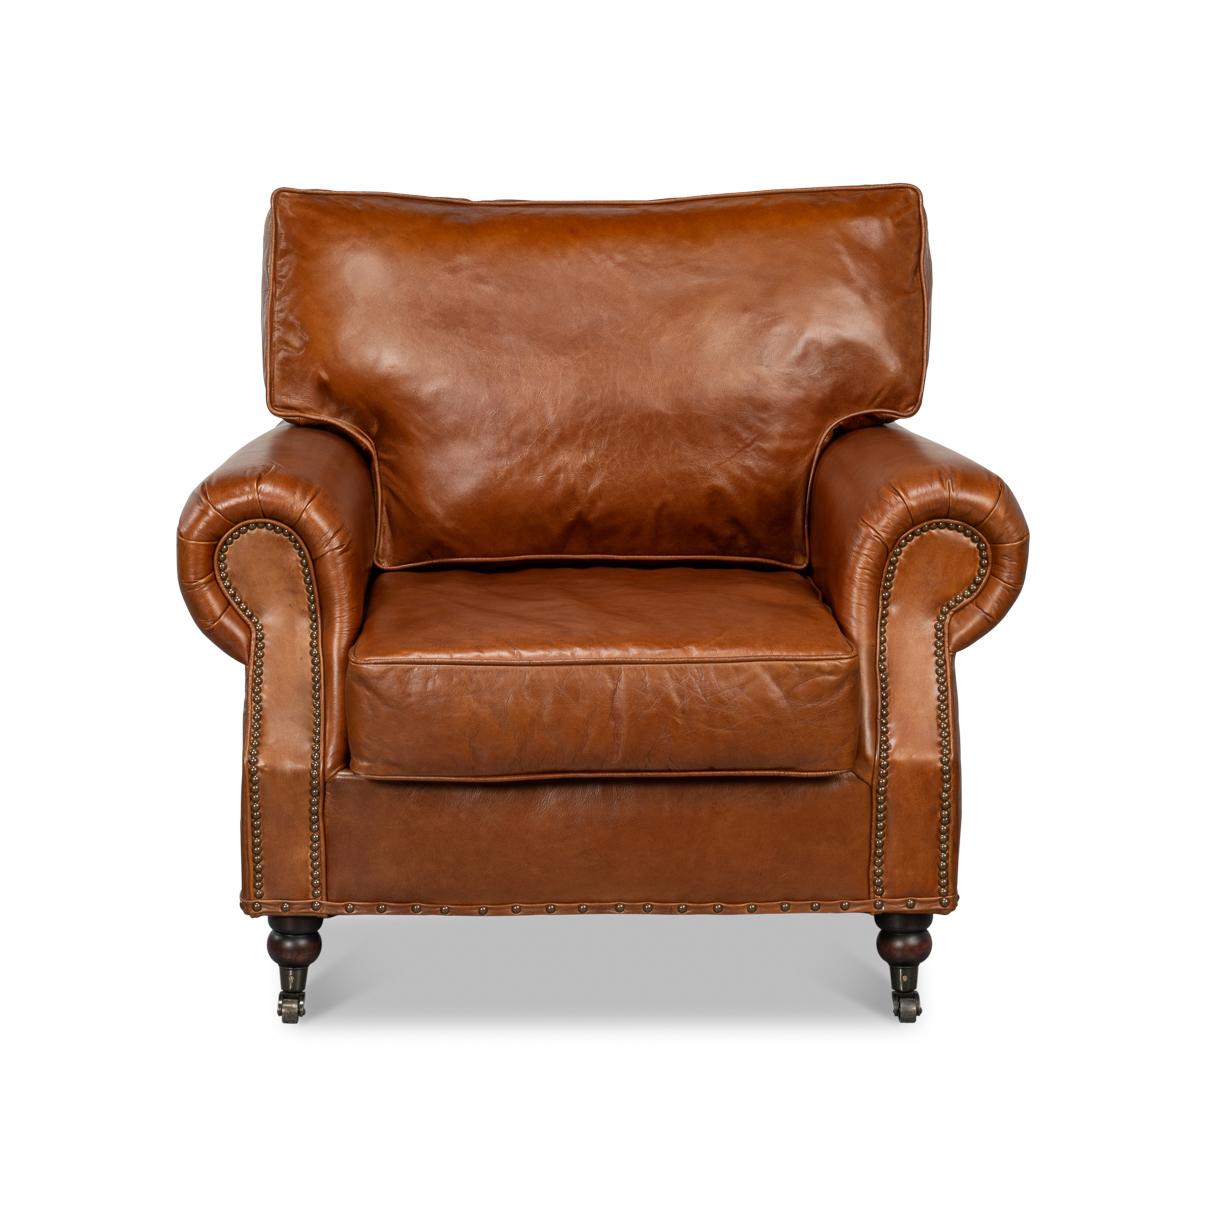 A leather upholstered club chair, in a vintage cigar brown aniline top-grade leather with a deep upholstered cushion backrest and seat cushion with rollover upholstered arms, finished with brass nailheads on mahogany feet with